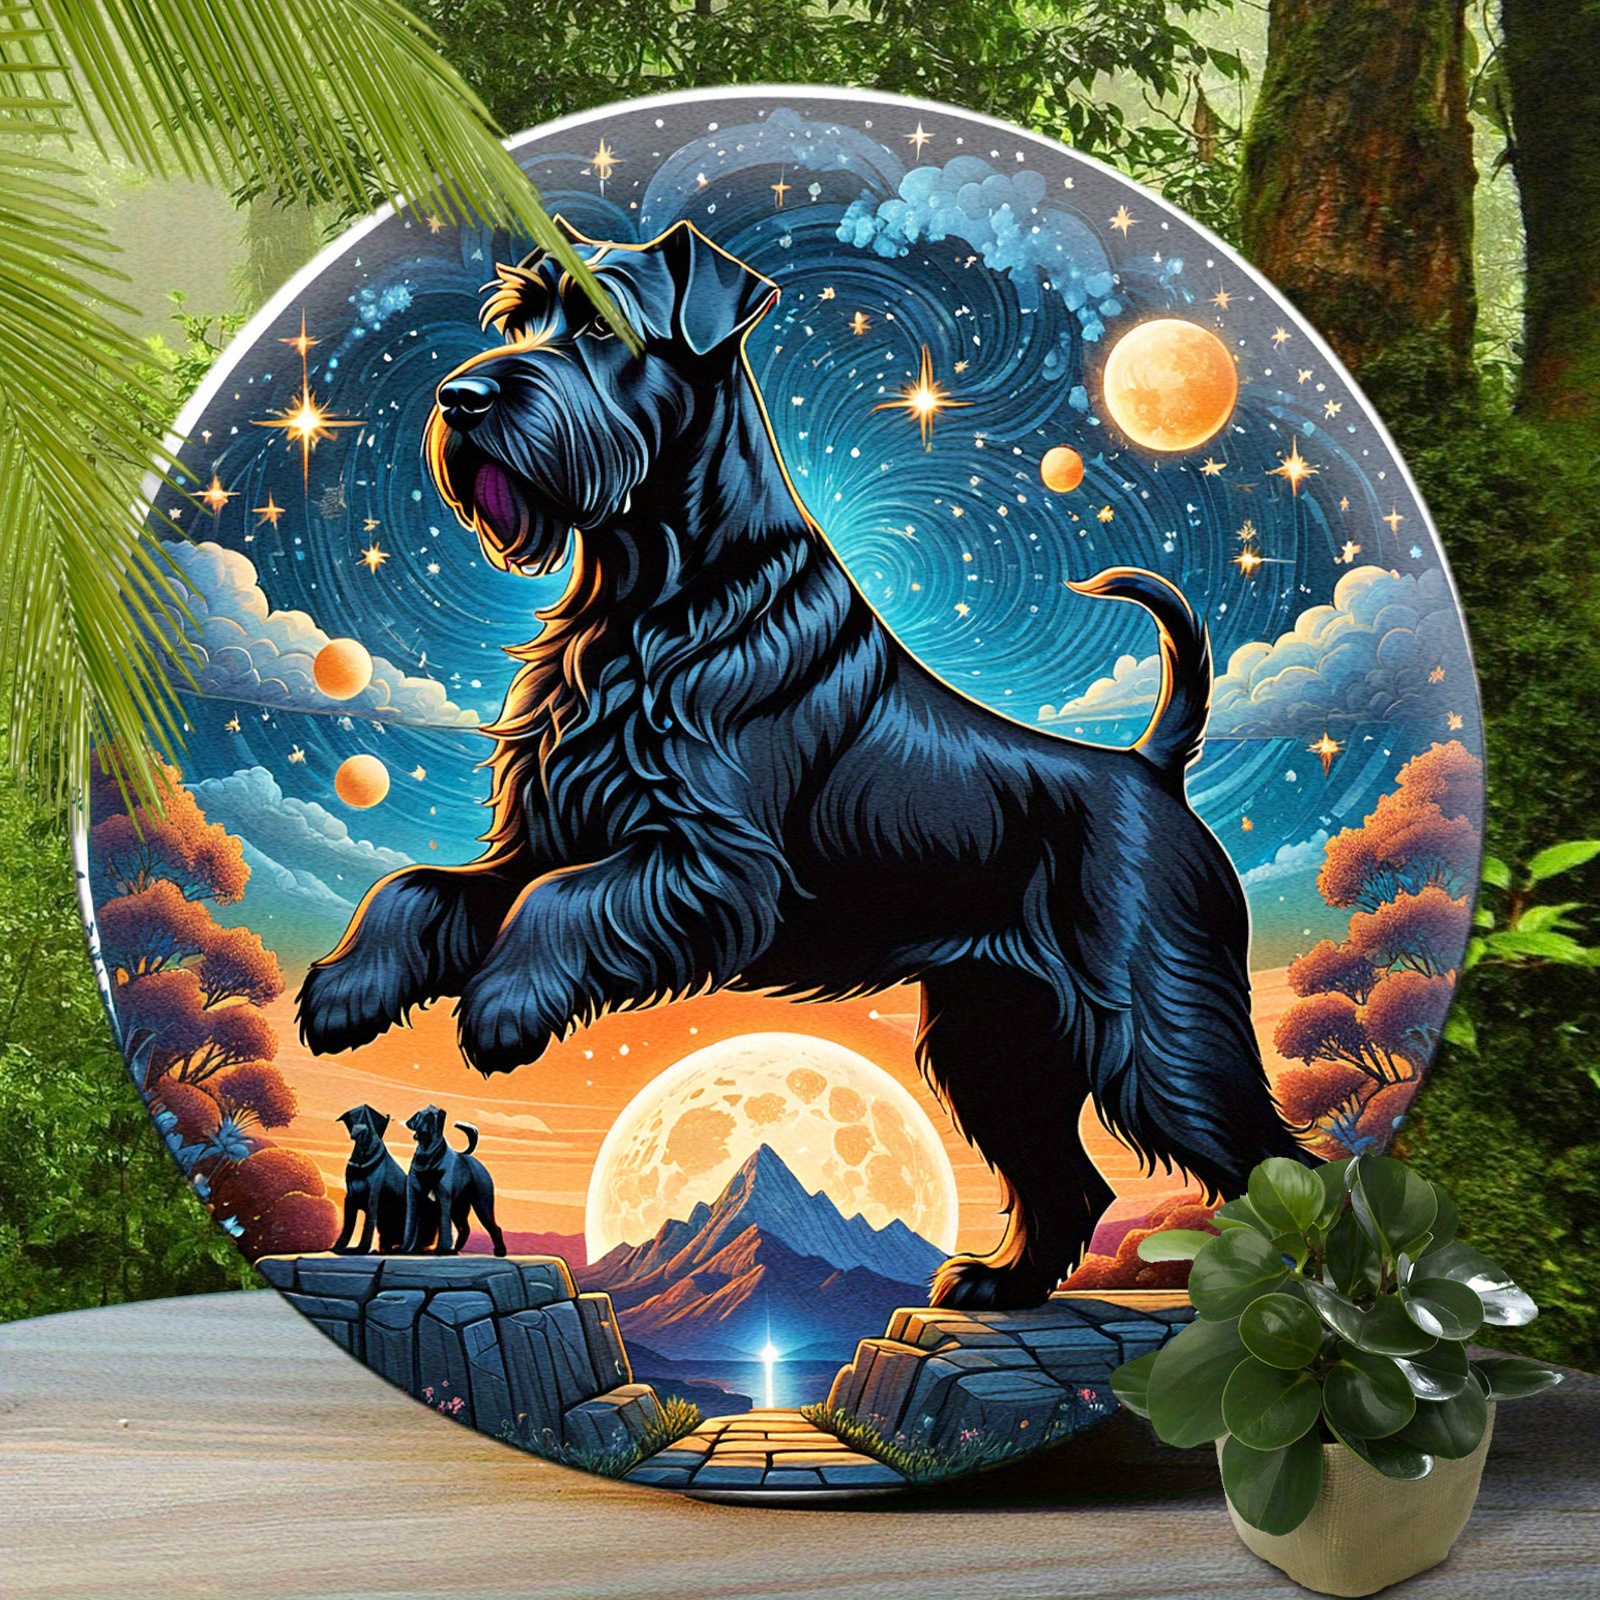 

1pc 8x8 Inch (20x20cm) Round Aluminum Sign Giant Schnauzer Vintage Round Aluminum Sign, Cute Dog Sign For Cafe Kitchen Club Bar Home Wall Art & Decor Gift